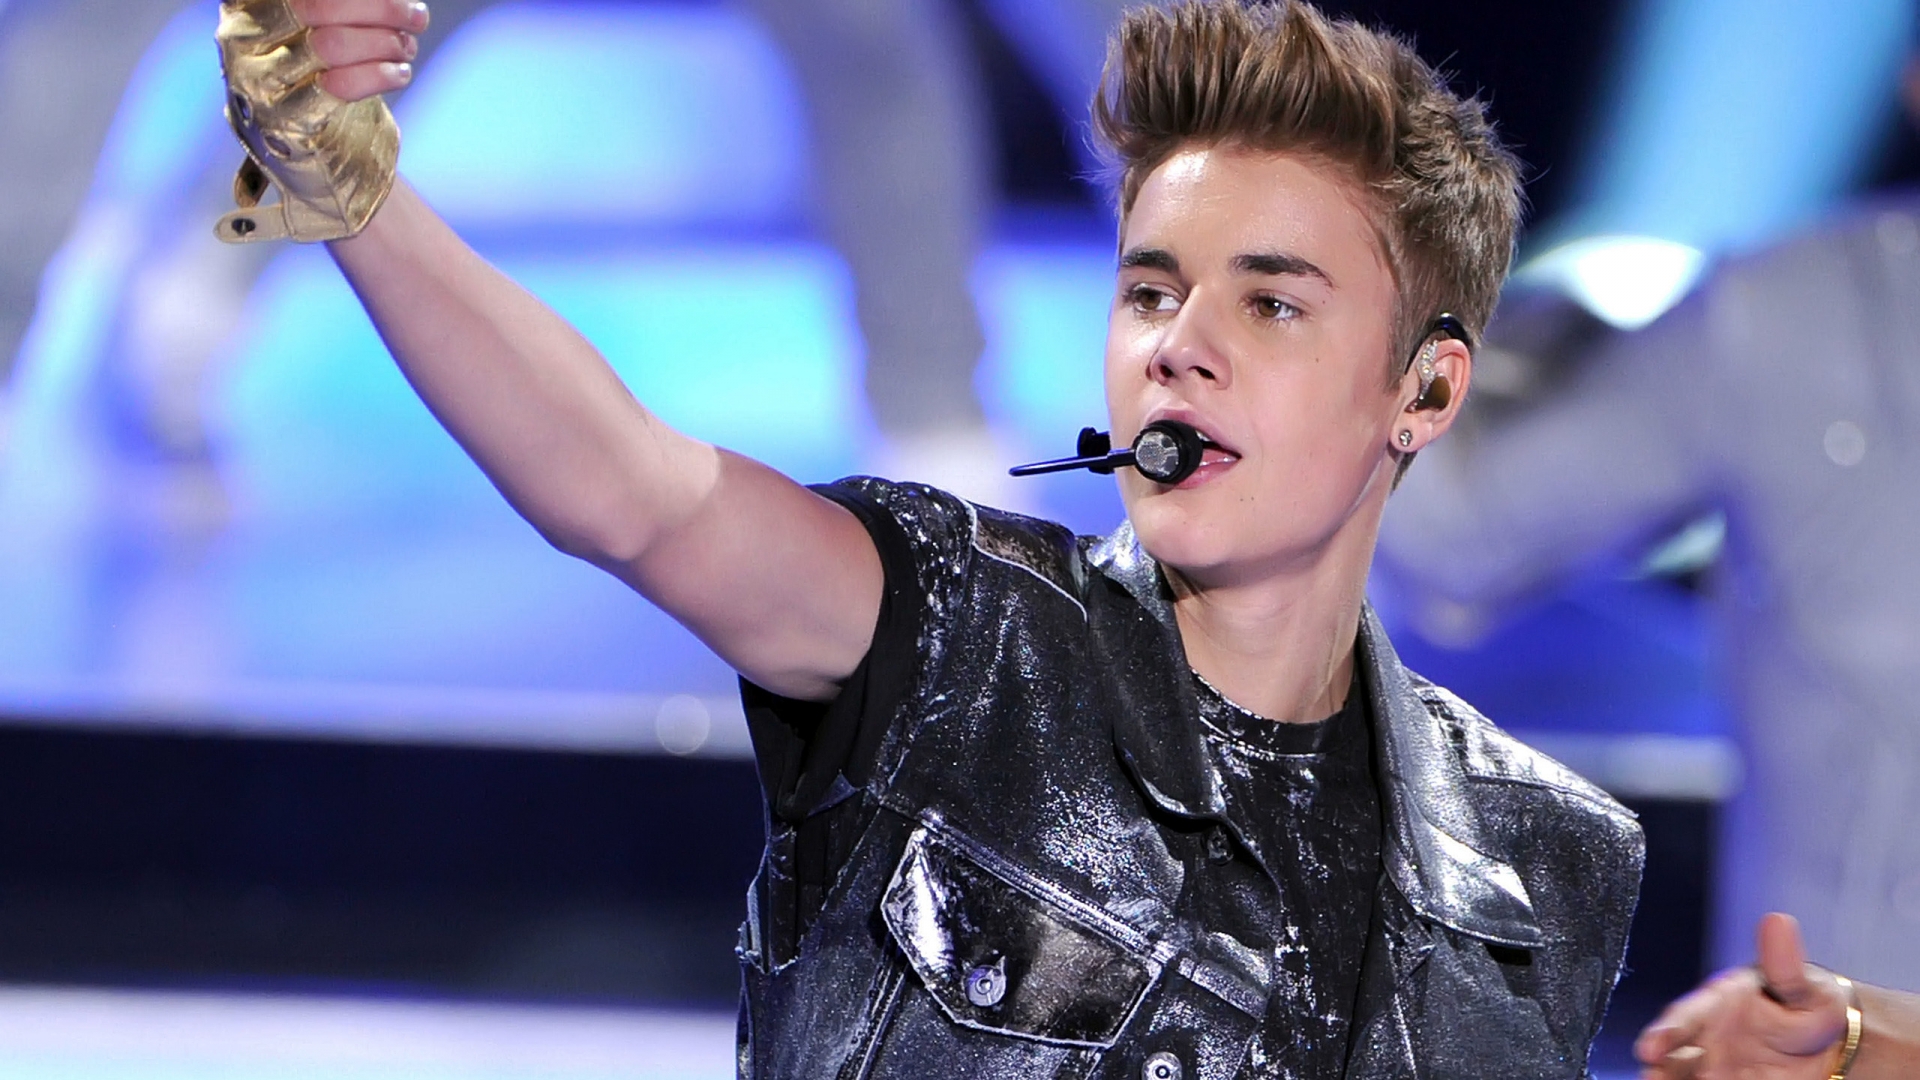 Justin Bieber on Stage for 1920 x 1080 HDTV 1080p resolution